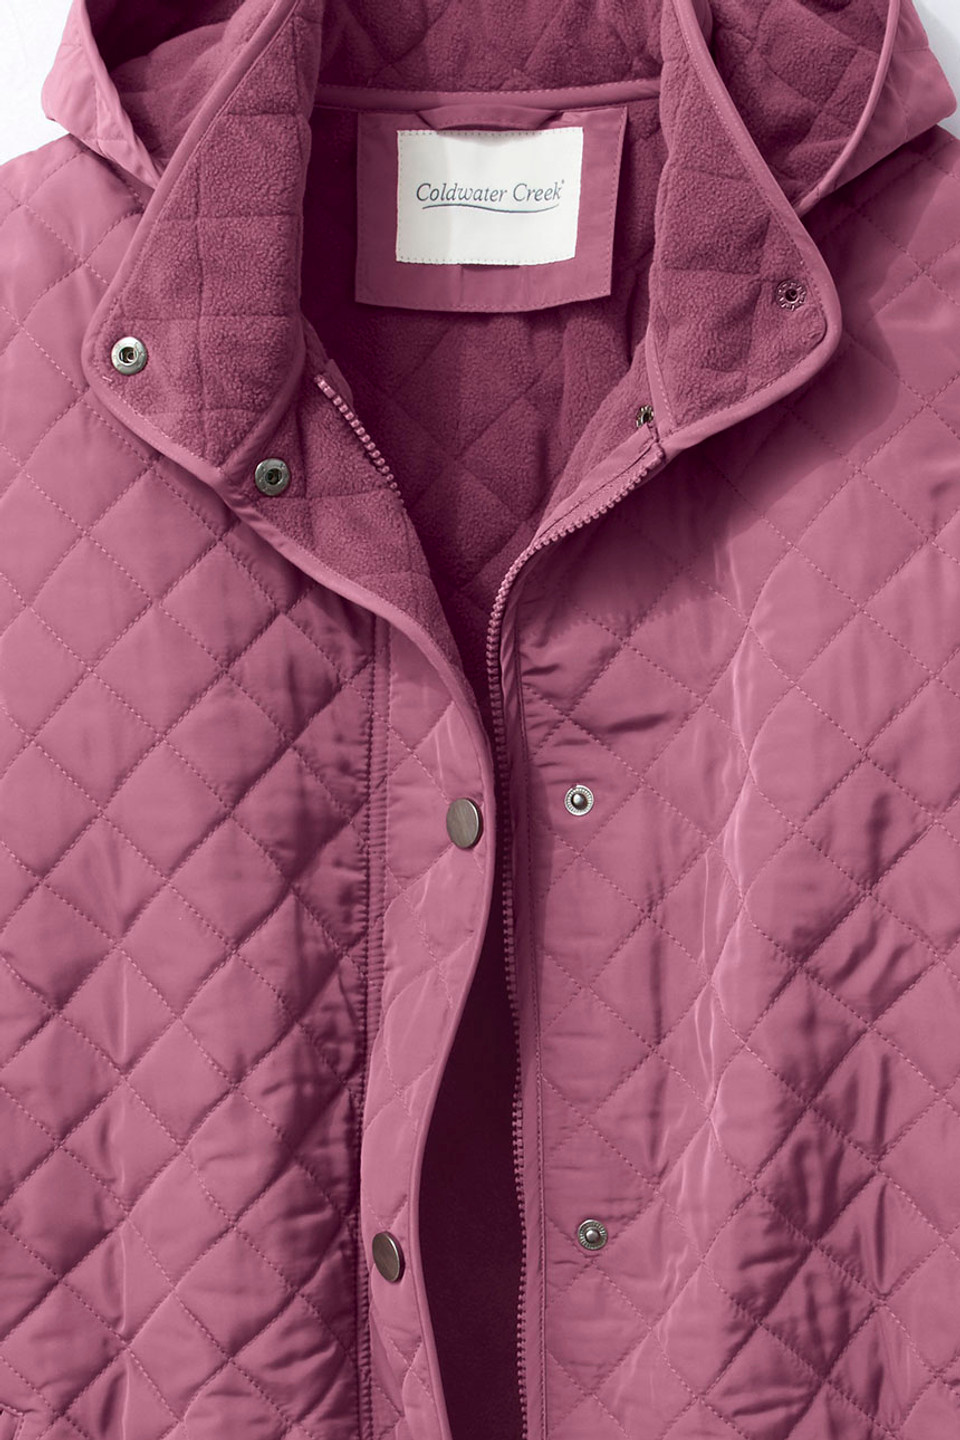 Quilted Car Coat - Coldwater Creek